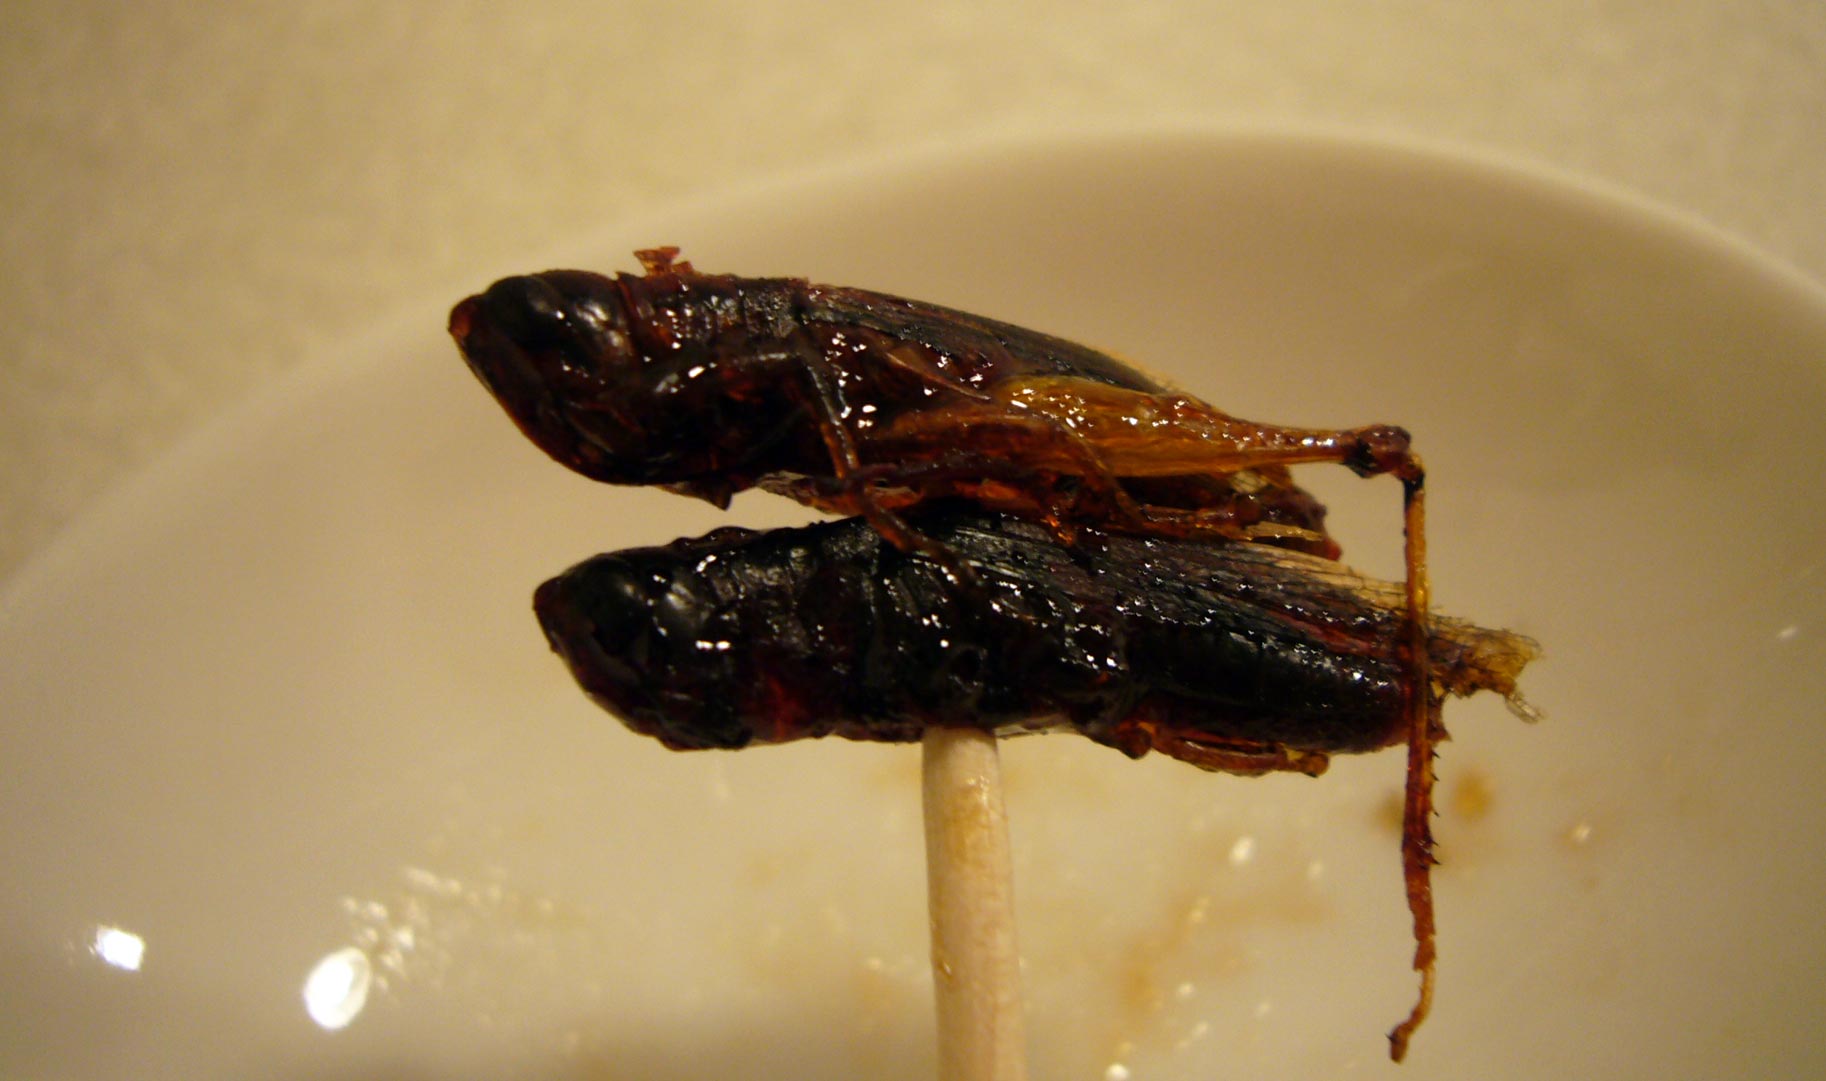 two grasshoppers on a stick